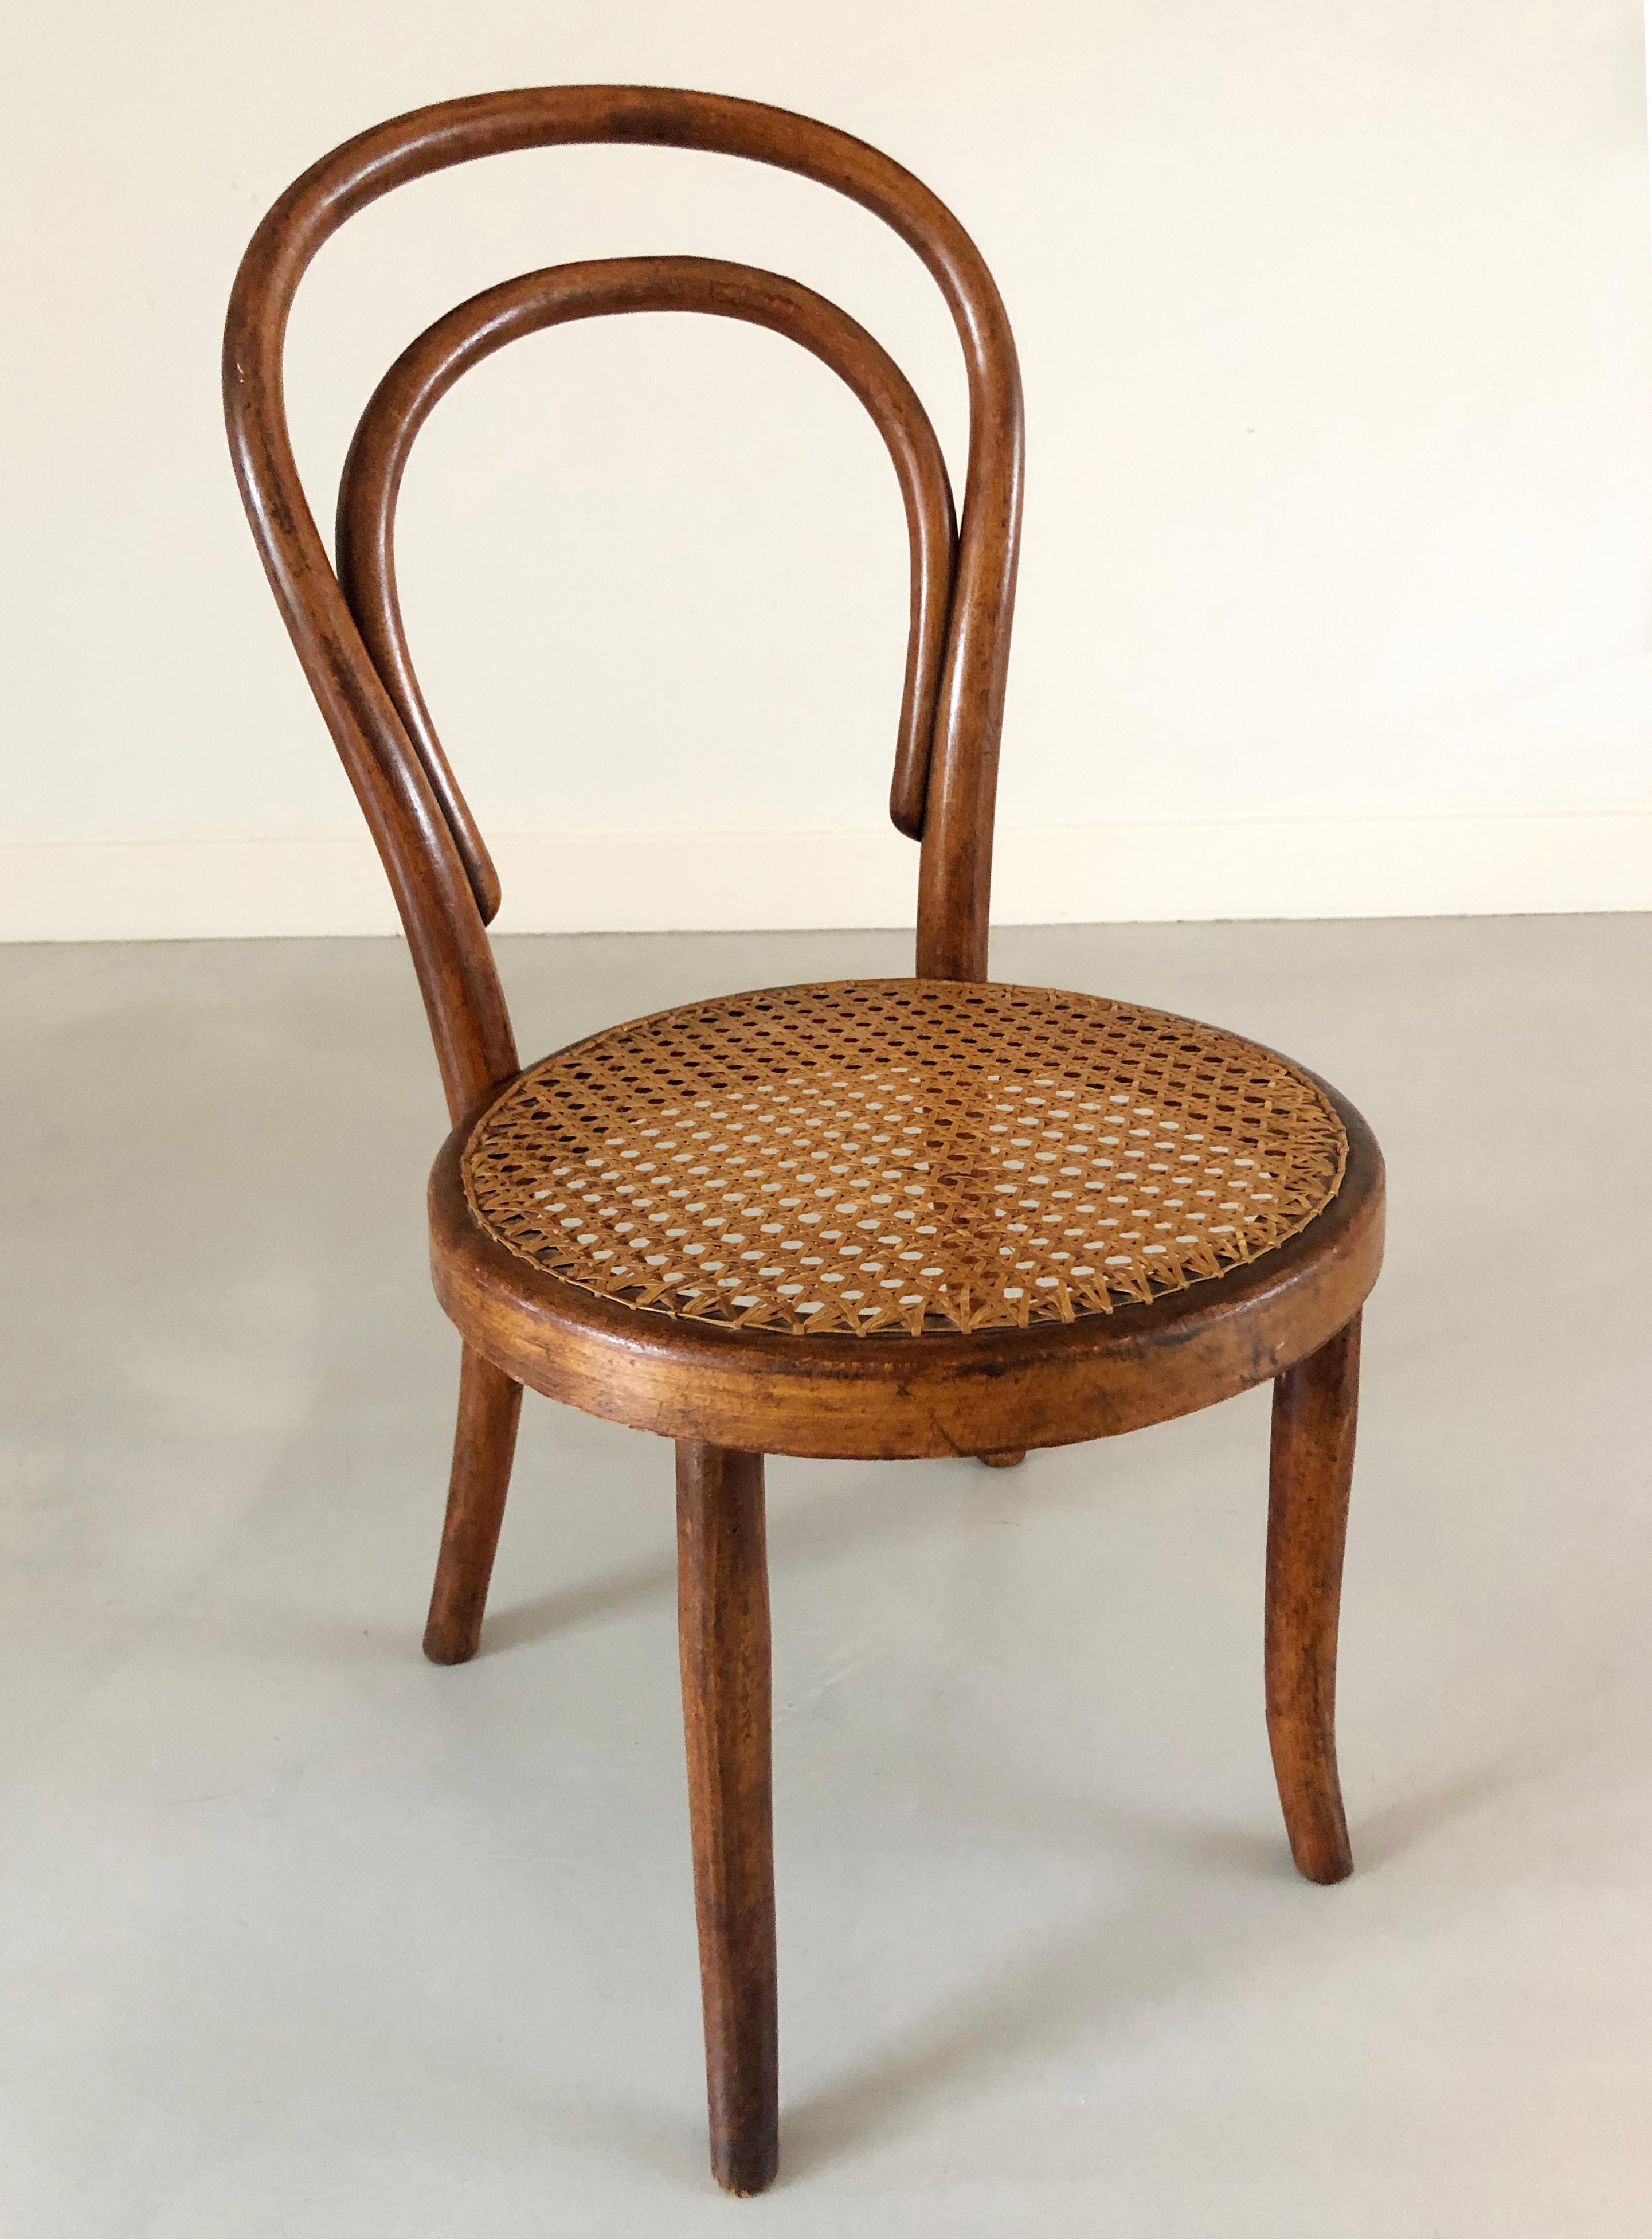 The Mother of all child’s chairs! 
Timeless, stimulating, perfect - what is said about “the chair of chairs”
Designed in 1859 - Developed in 1860 by one of the sons of company founder Michael Thonet. A simple, uncomplicated shape and a high degree